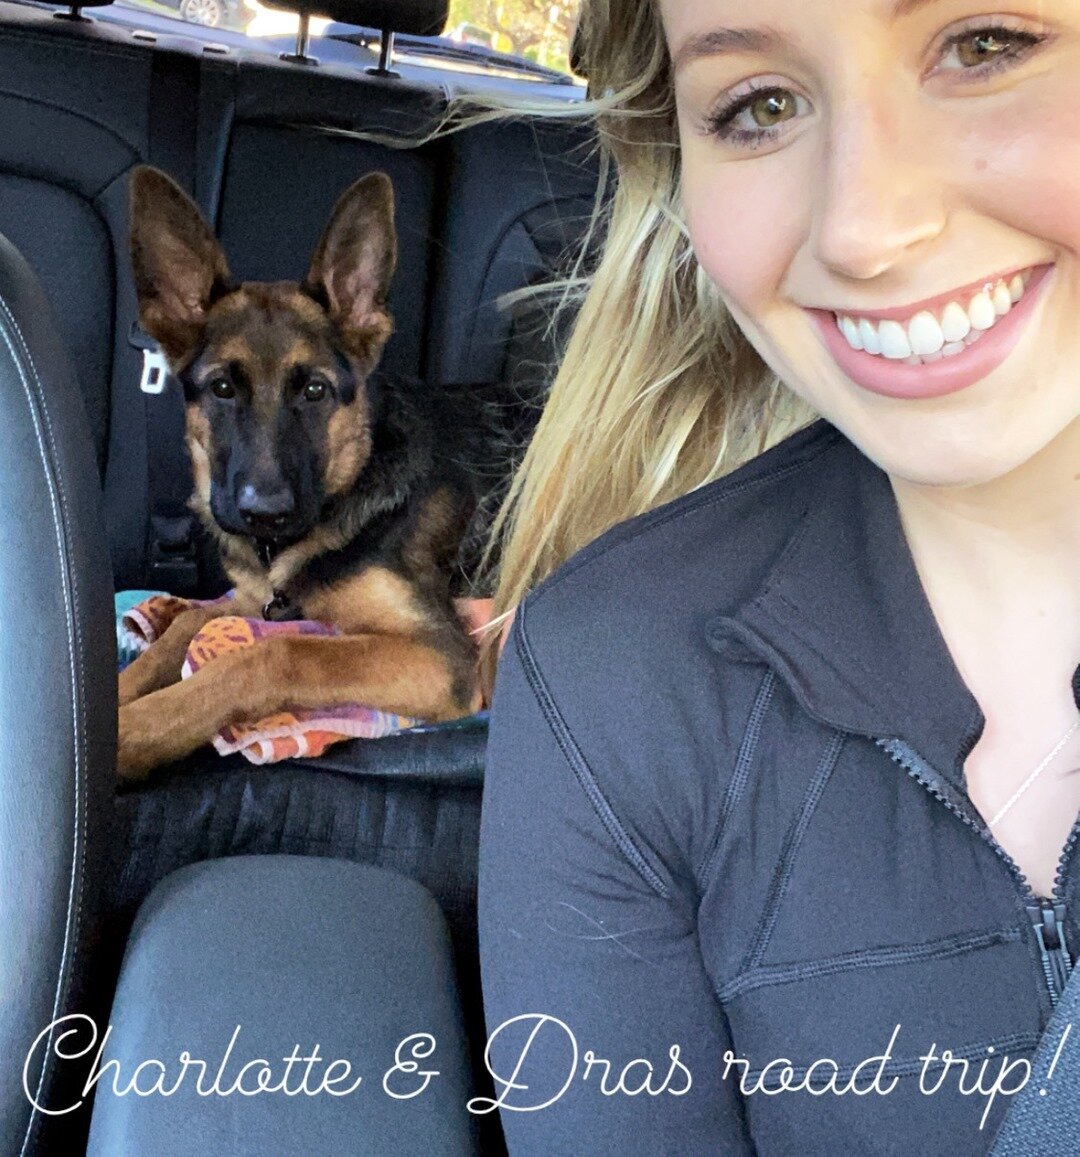 Dras and Charlotte super excited for their road trip to the farm for training and puppy play dates! 😍